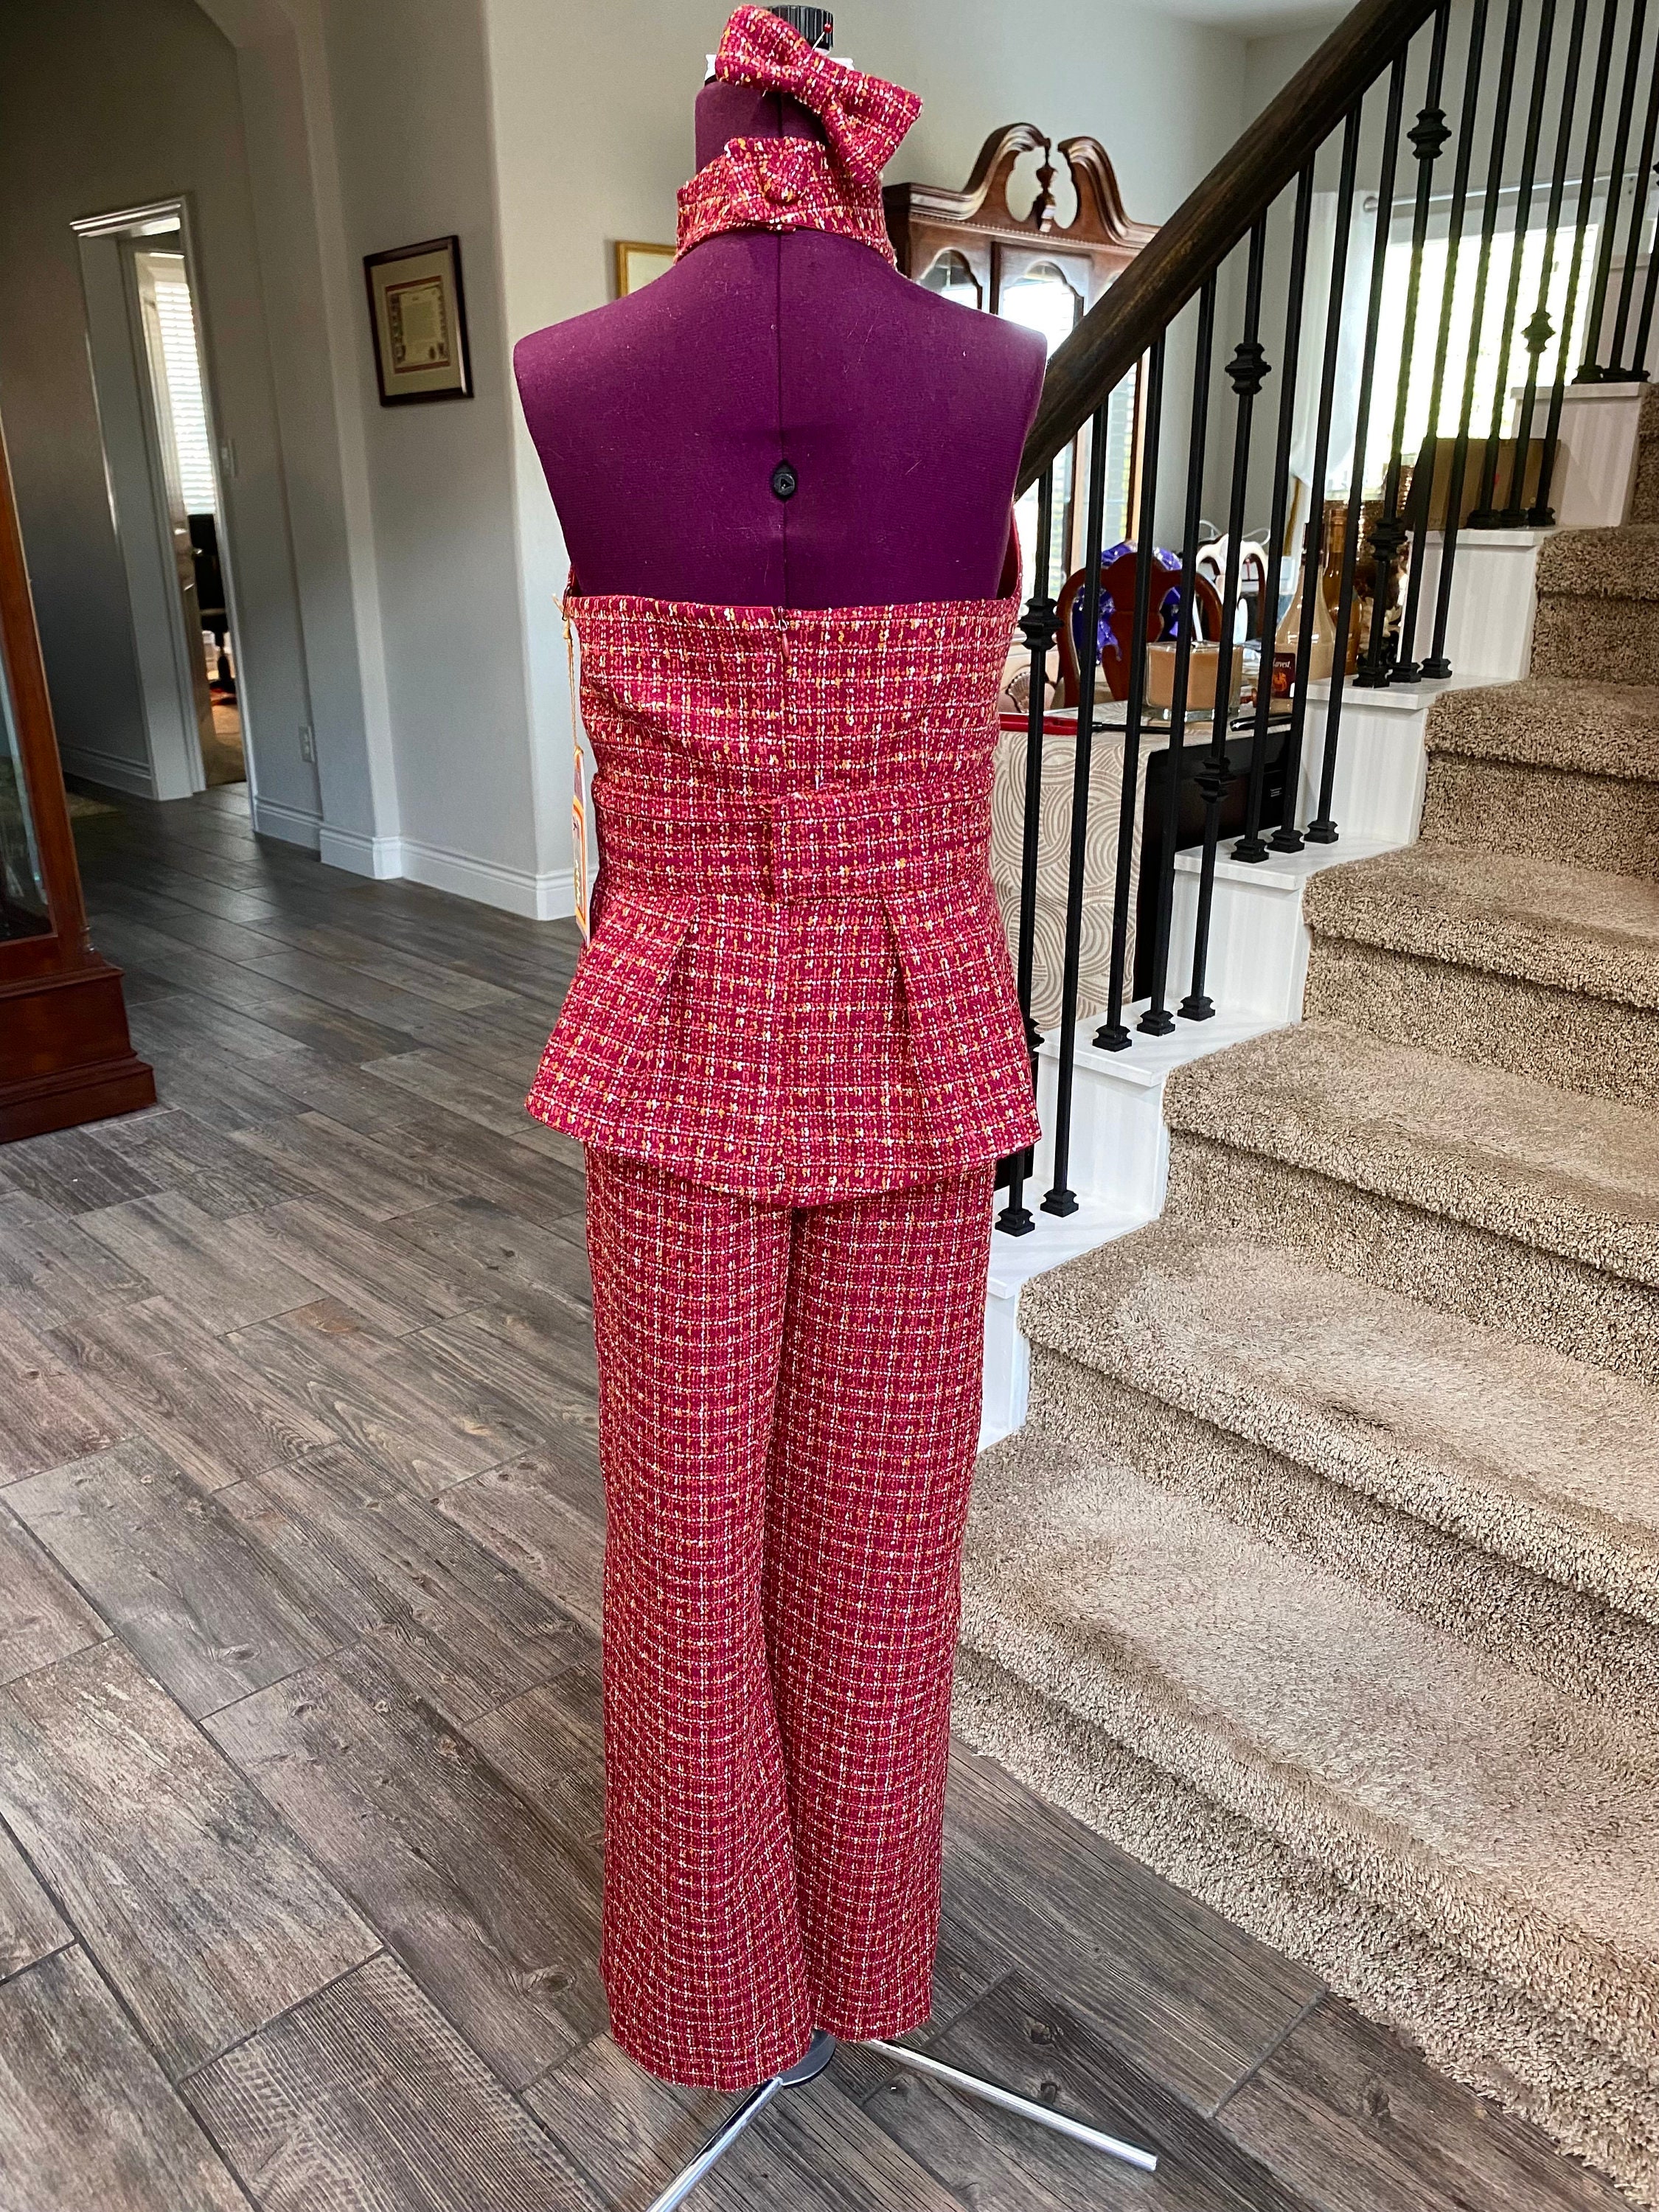 Girls Pageant Sportswear, Size 10, Pageant Top and Pant Set Casualwear,  Tweed Jumpsuit, Raspberry Red Tweed Pant Suit, Interview Outfit 